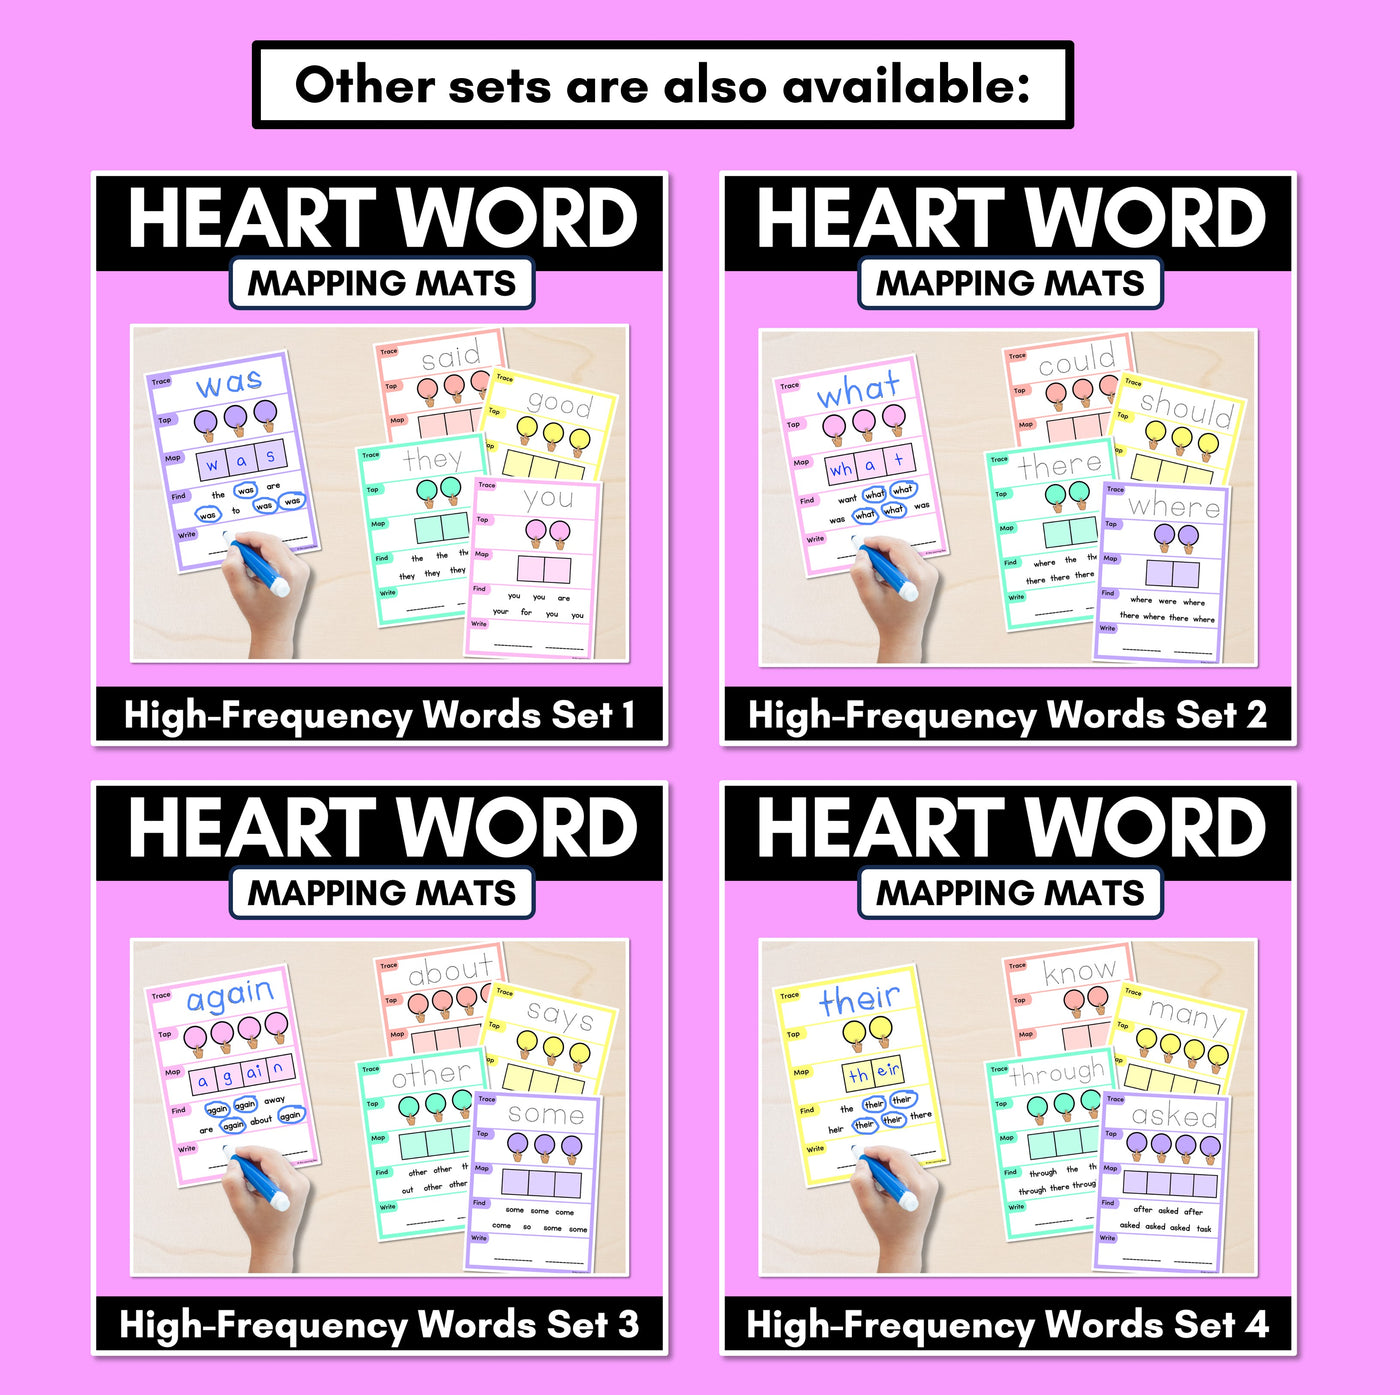 HEART WORD MAPPING MATS - High-Frequency Words Set 3